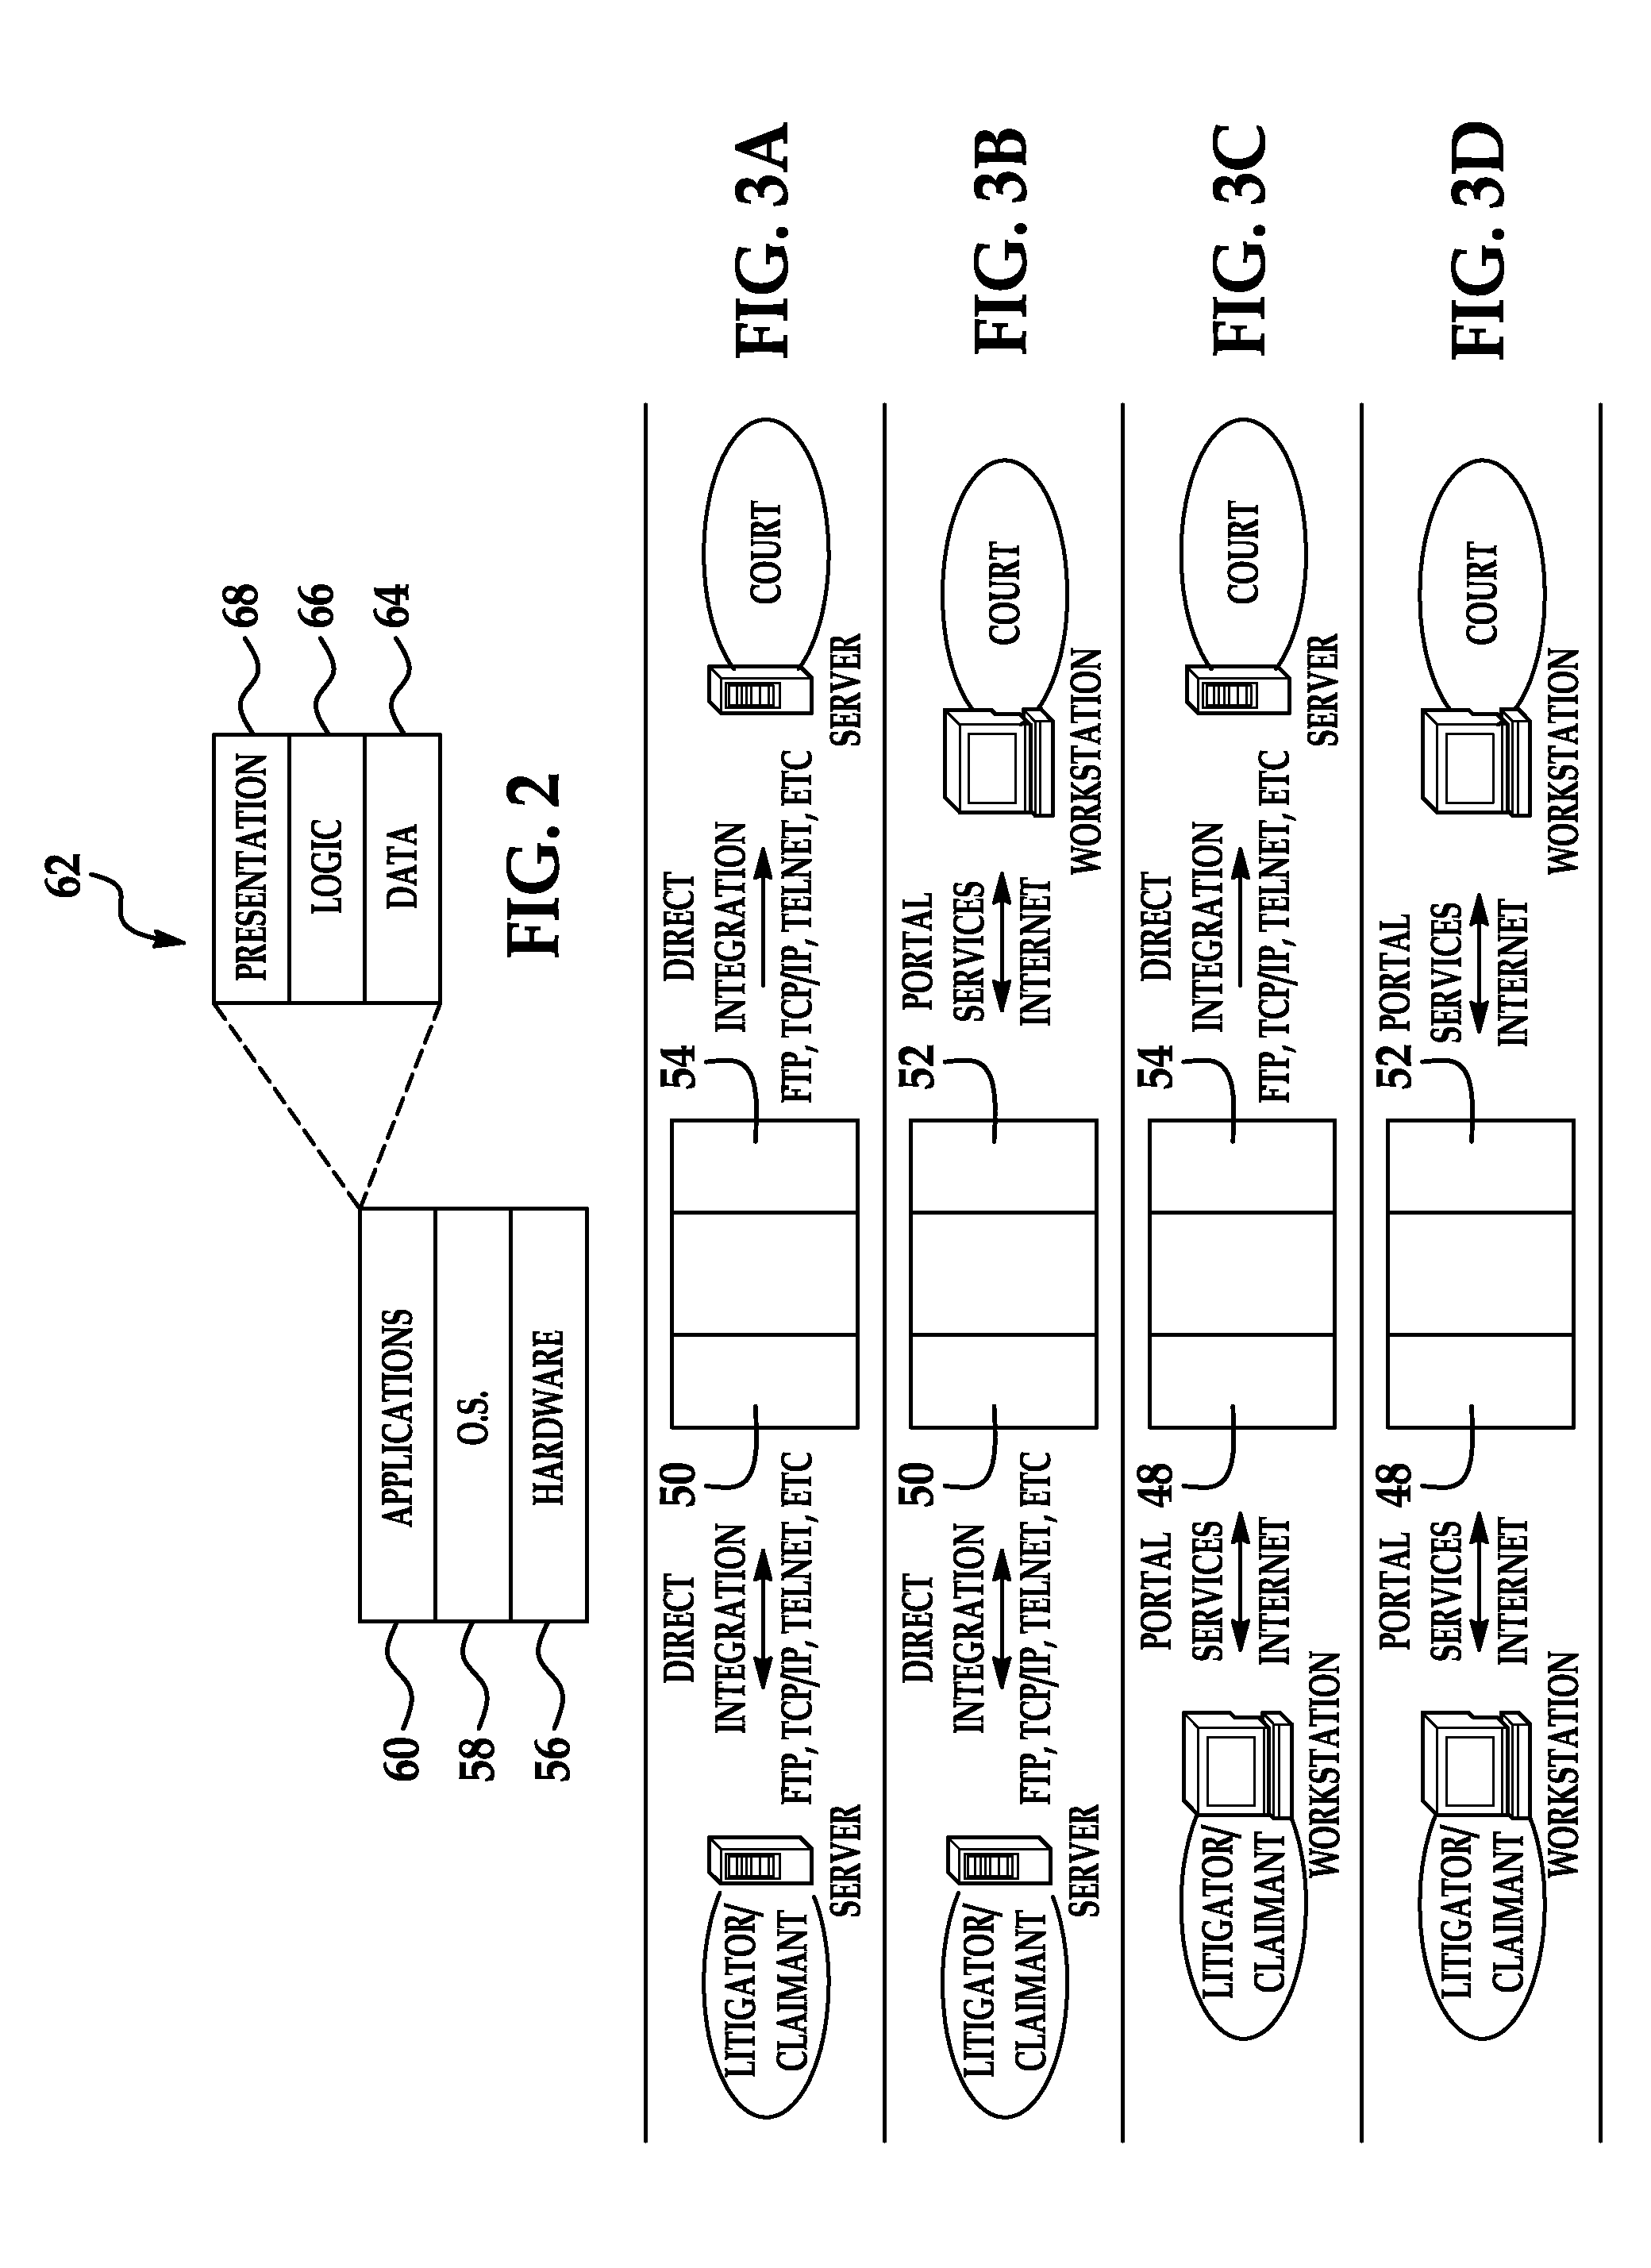 System and method for legal document authoring and electronic court filing